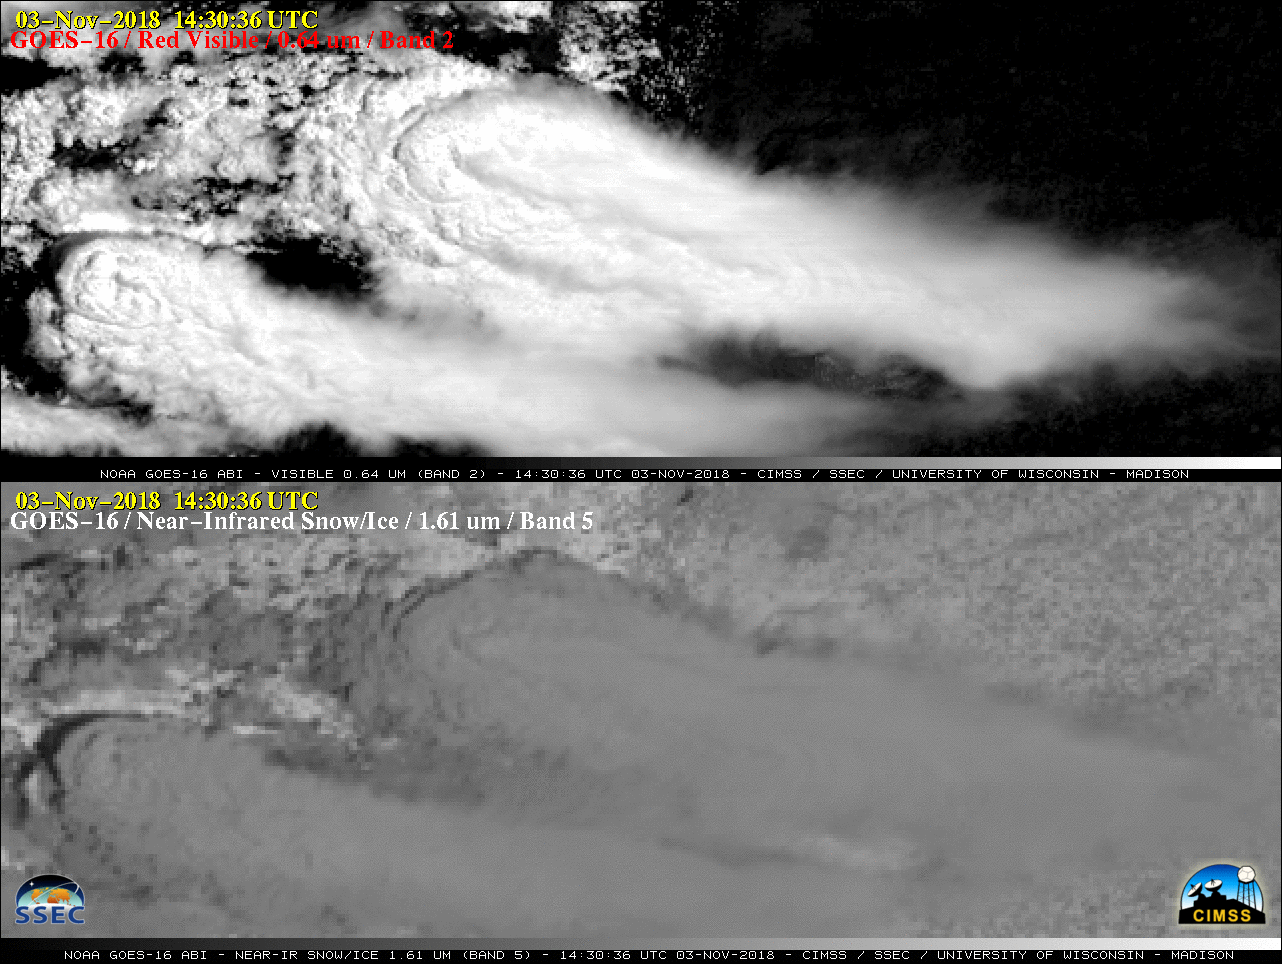 GOES-16 "Red" Visible (0.64 µm), Near-Infrared "Snow/Ice" (1.61 µm) images [click to play animation | MP4]